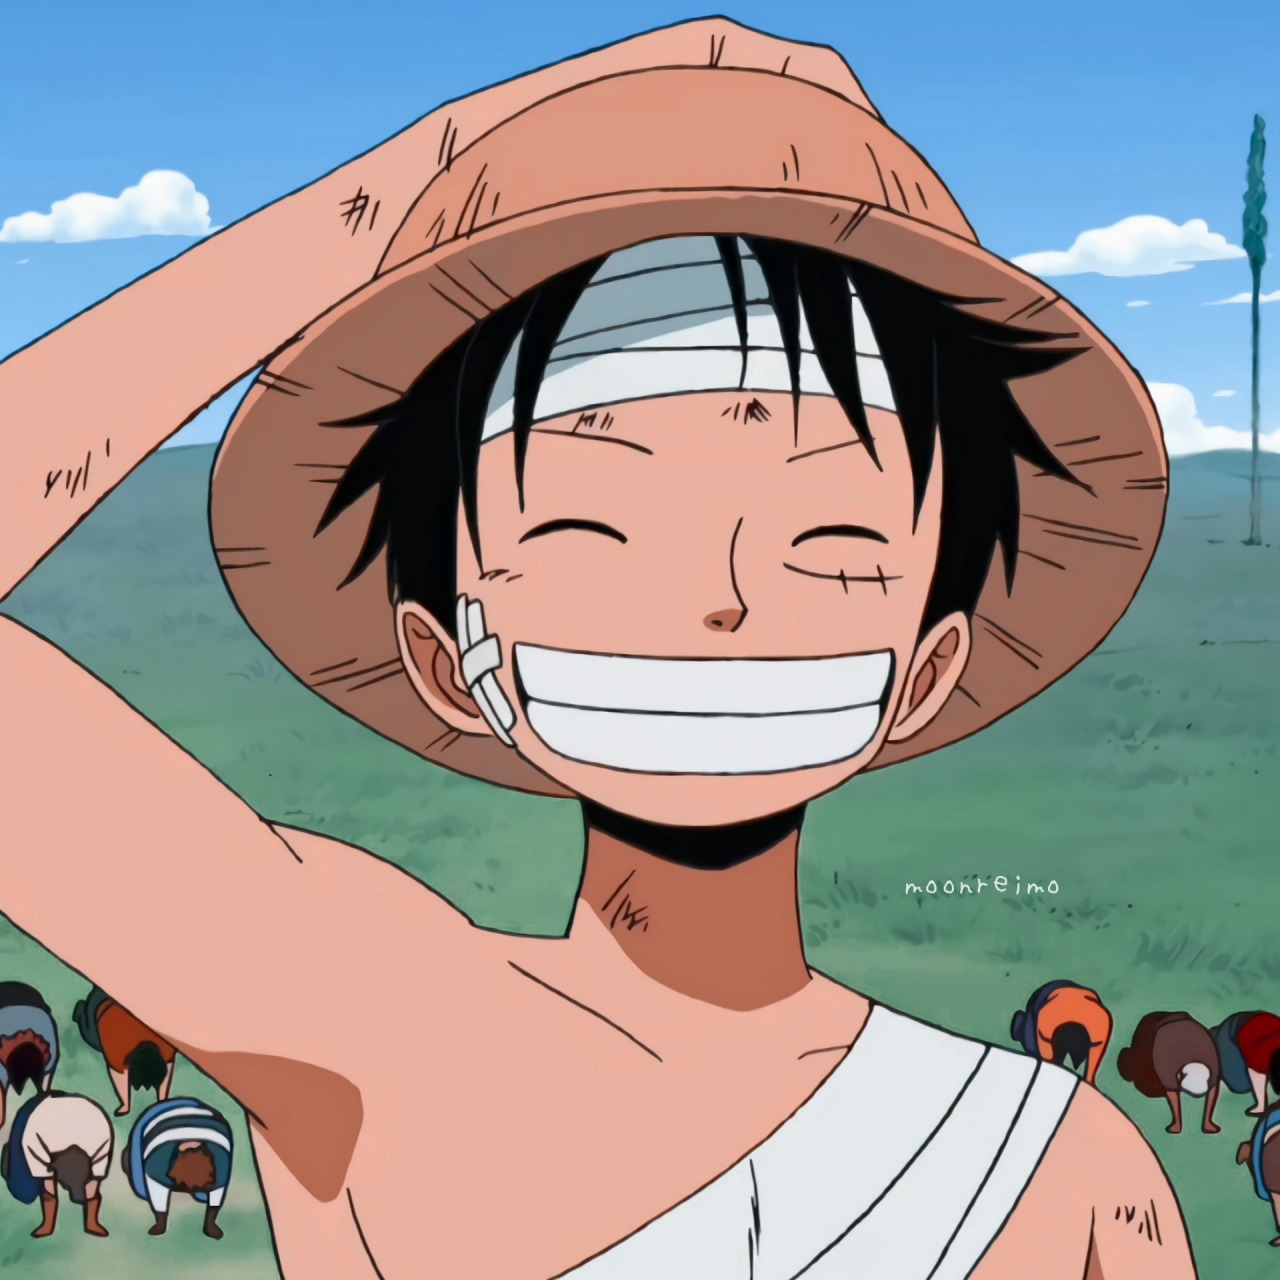 Discover 75+ anime pfp luffy - in.cdgdbentre